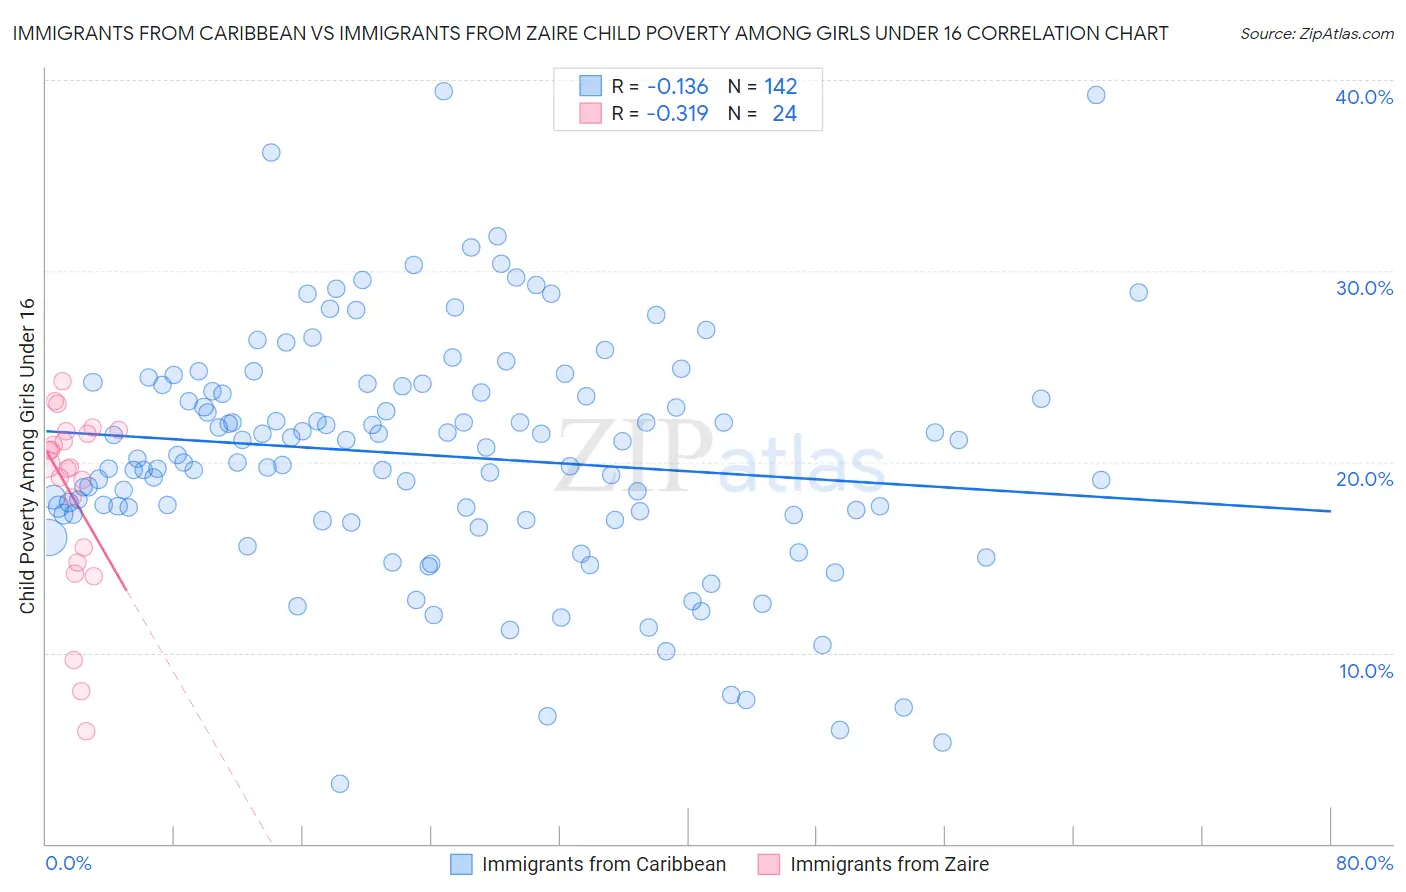 Immigrants from Caribbean vs Immigrants from Zaire Child Poverty Among Girls Under 16